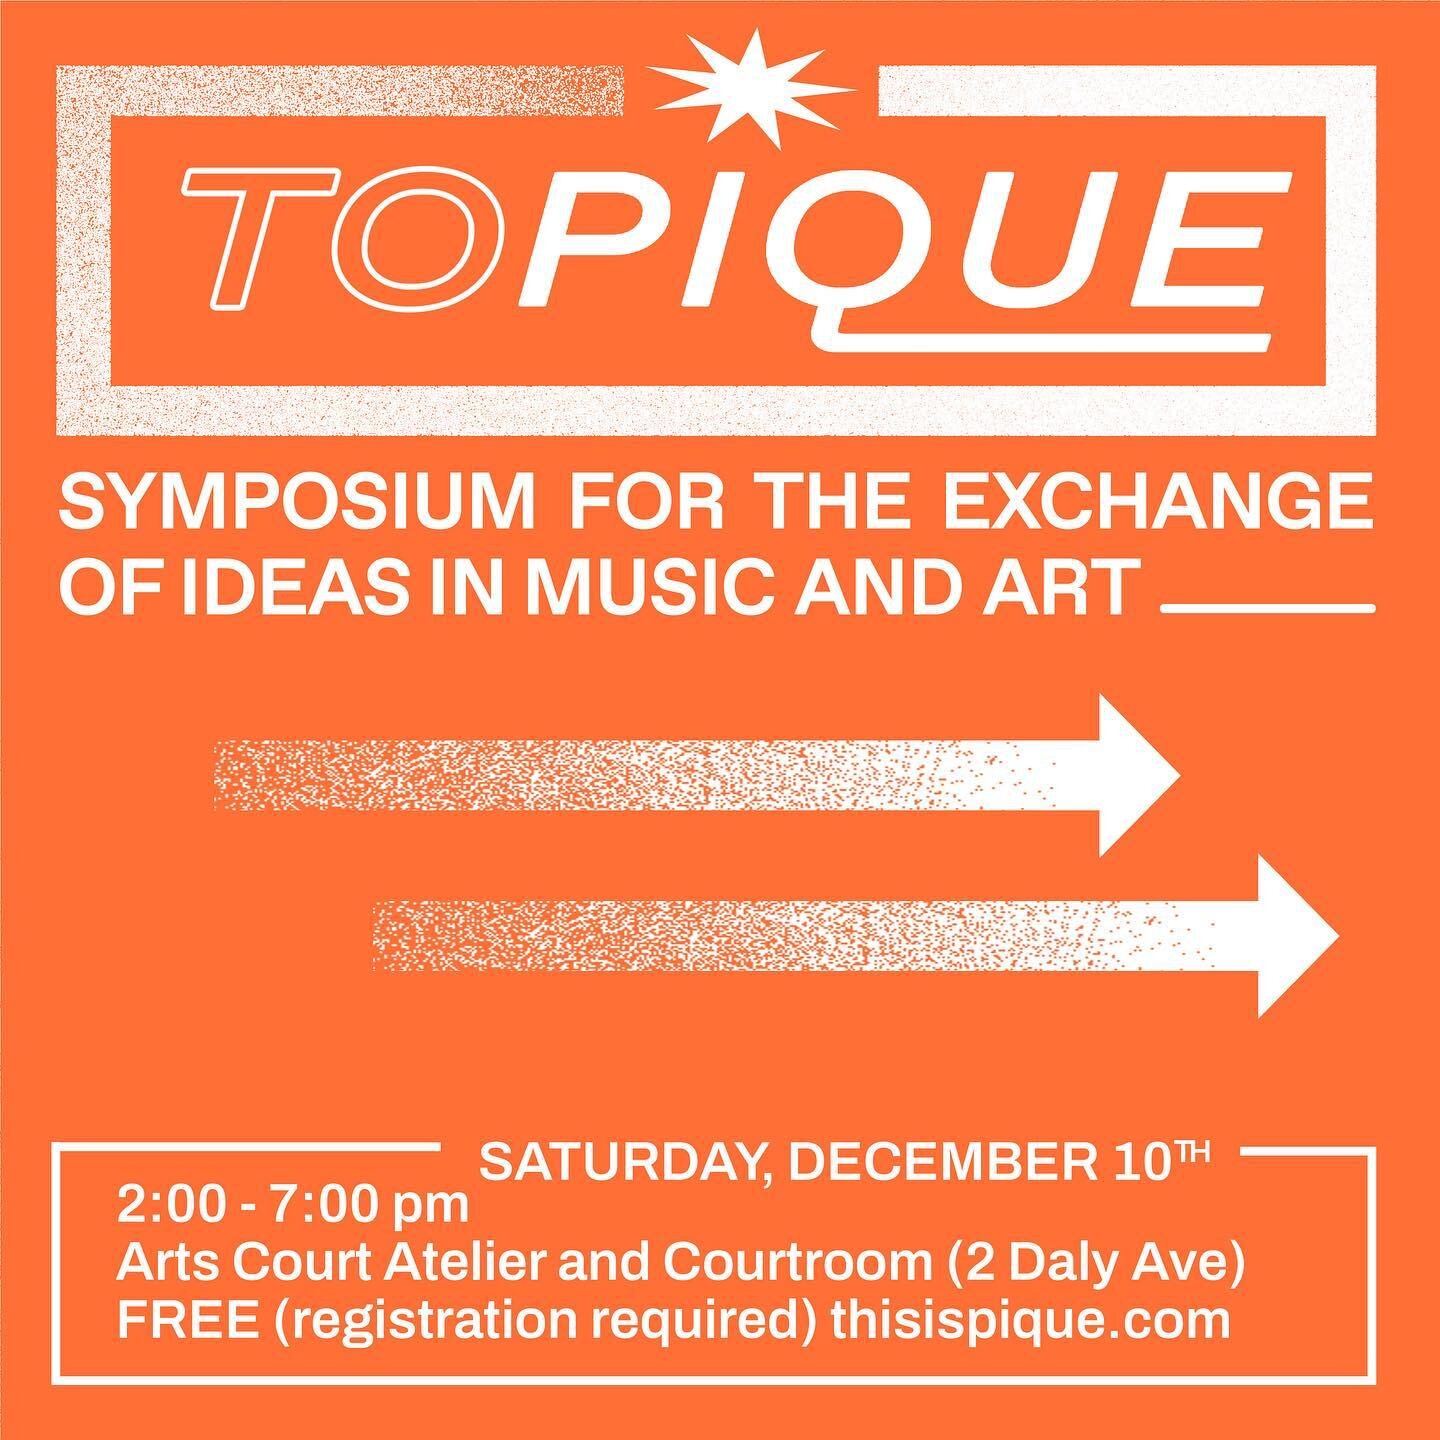 Announcing TOPIQUE, a symposium for the exchange of ideas in music and art, presented at Pique winter edition on Saturday, December 10, 2-7 pm.

Topique gathers cultural leaders and emergent voices to offer new ideas, alternative models, and radical 